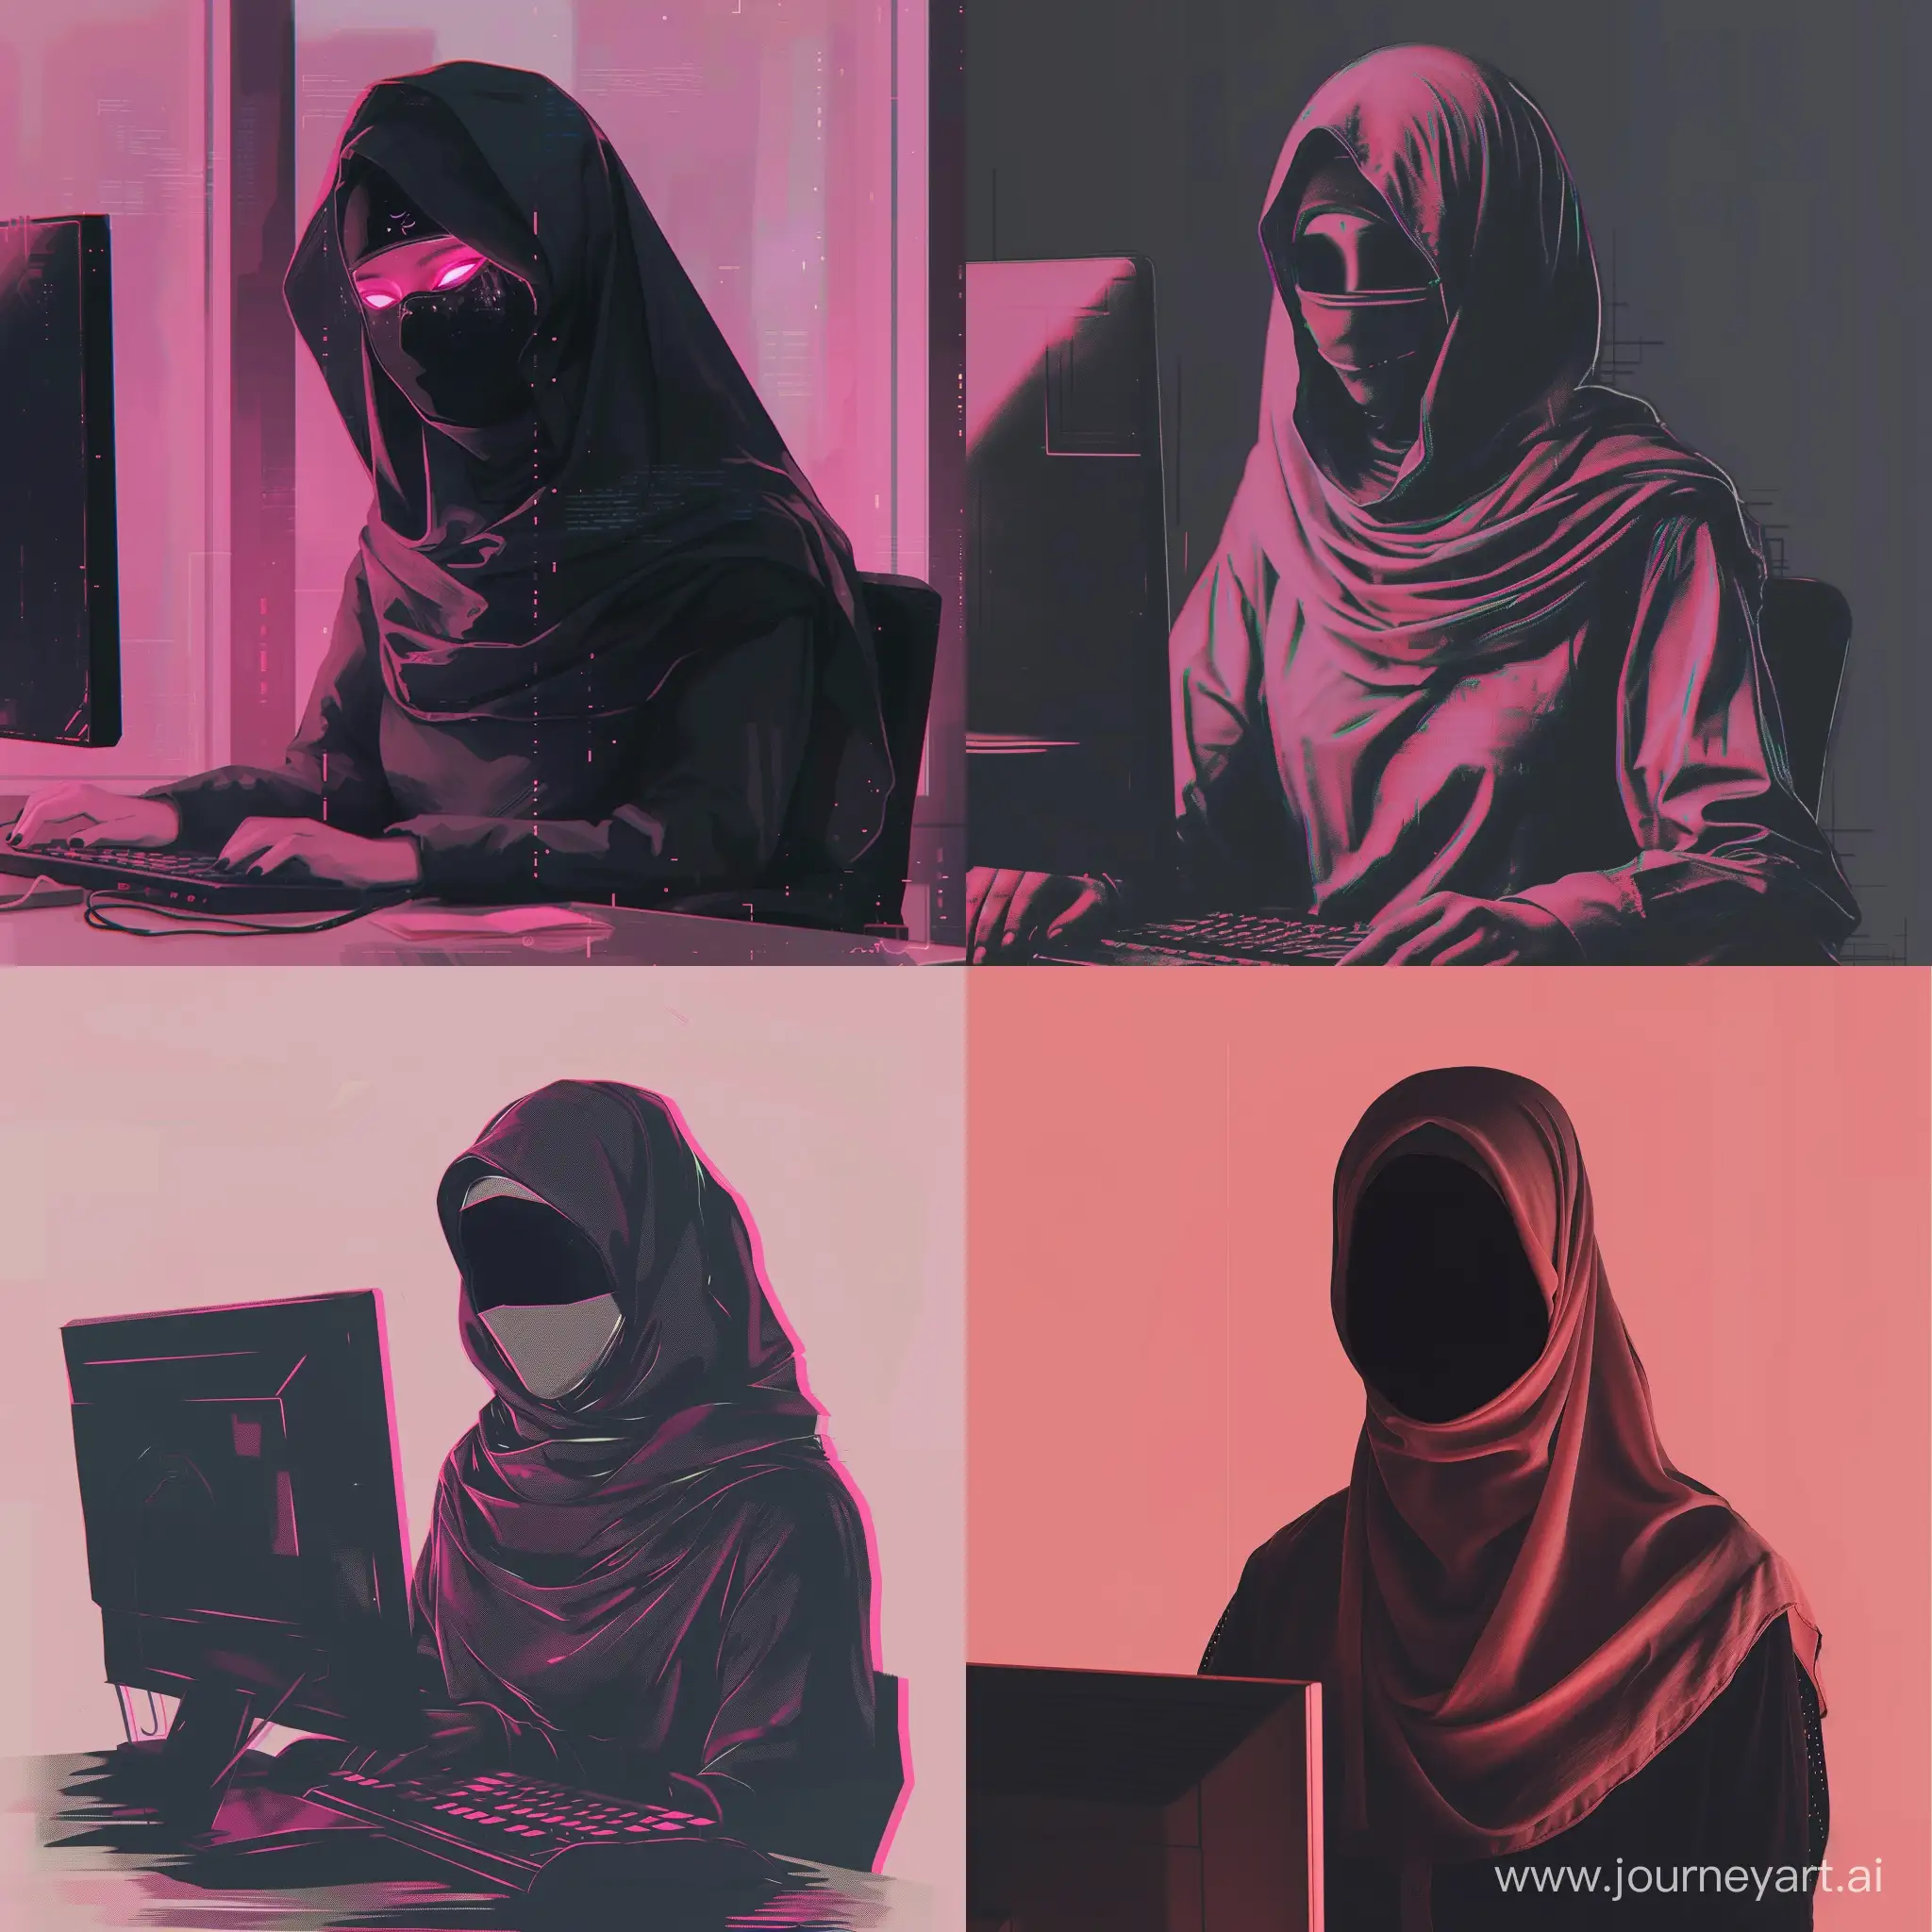 A picture of a girl in a hijab without a face, a girl at a computer, pink and black colors